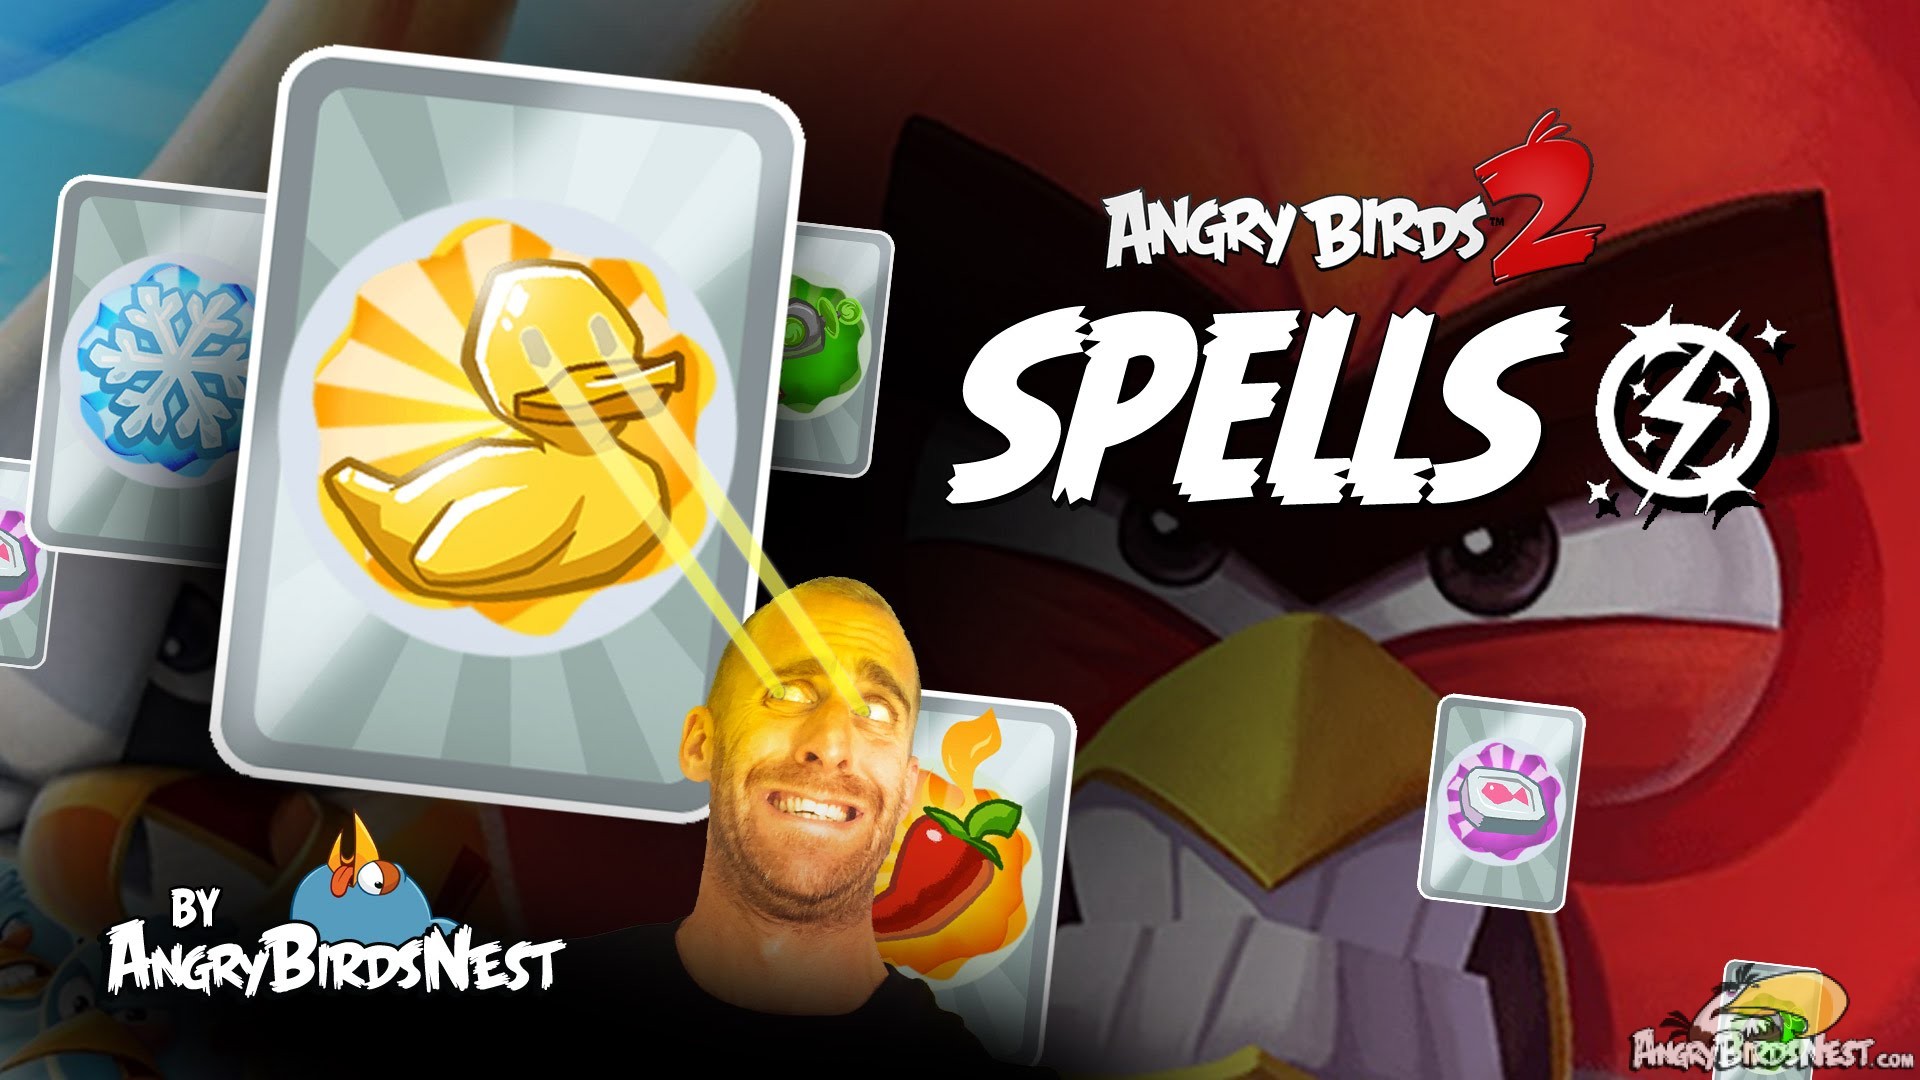 Angry Birds 2 Spells Revealed Feature Image